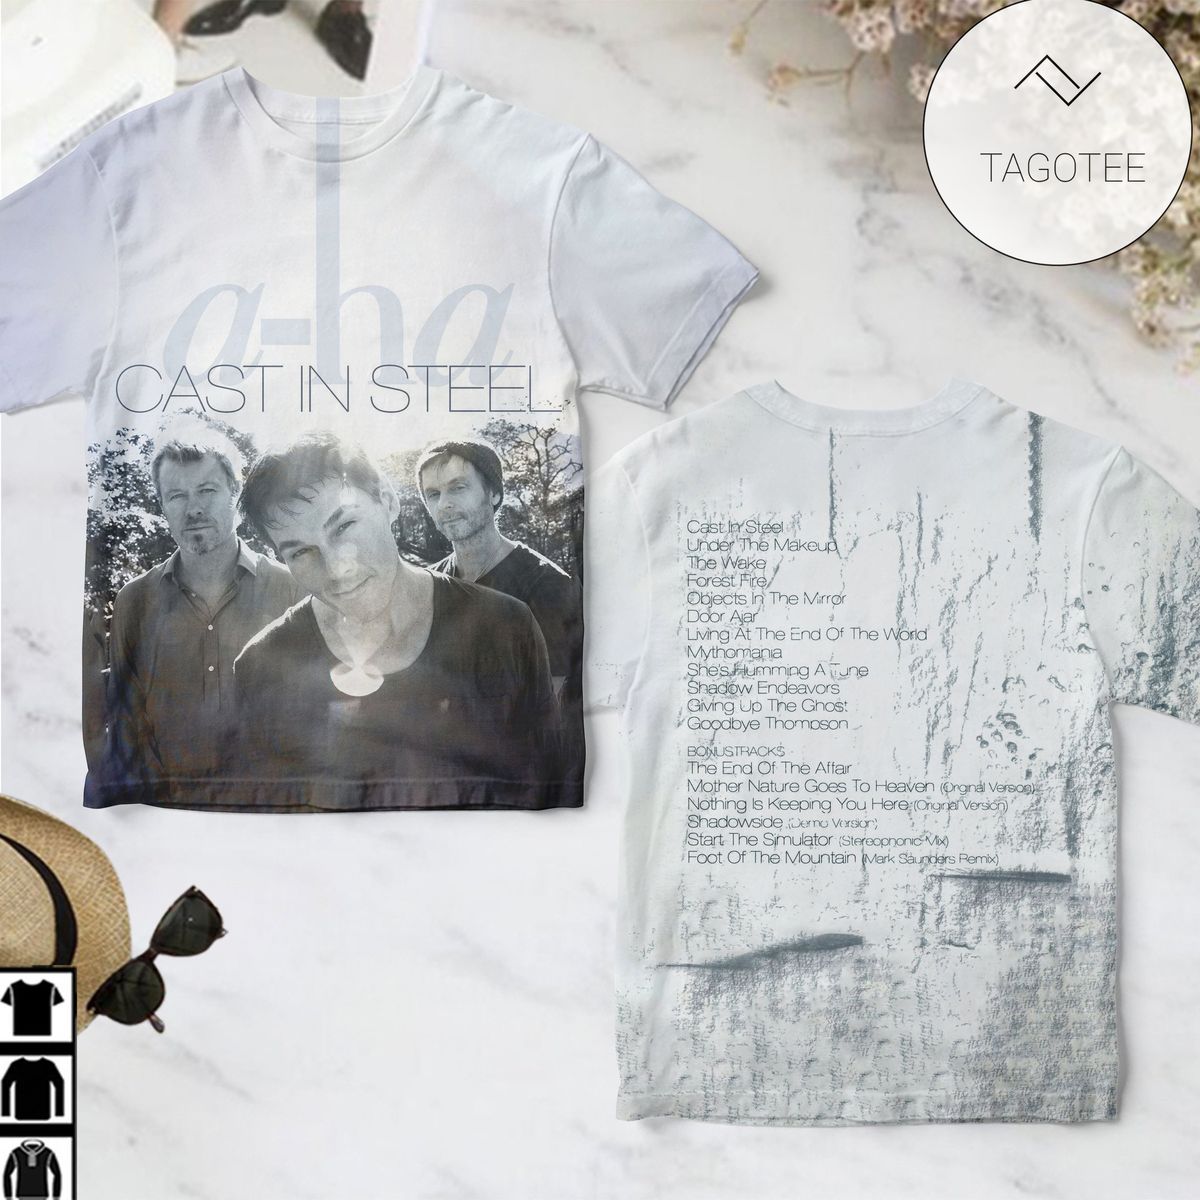 A-ha Cast In Steel Album Cover Shirt